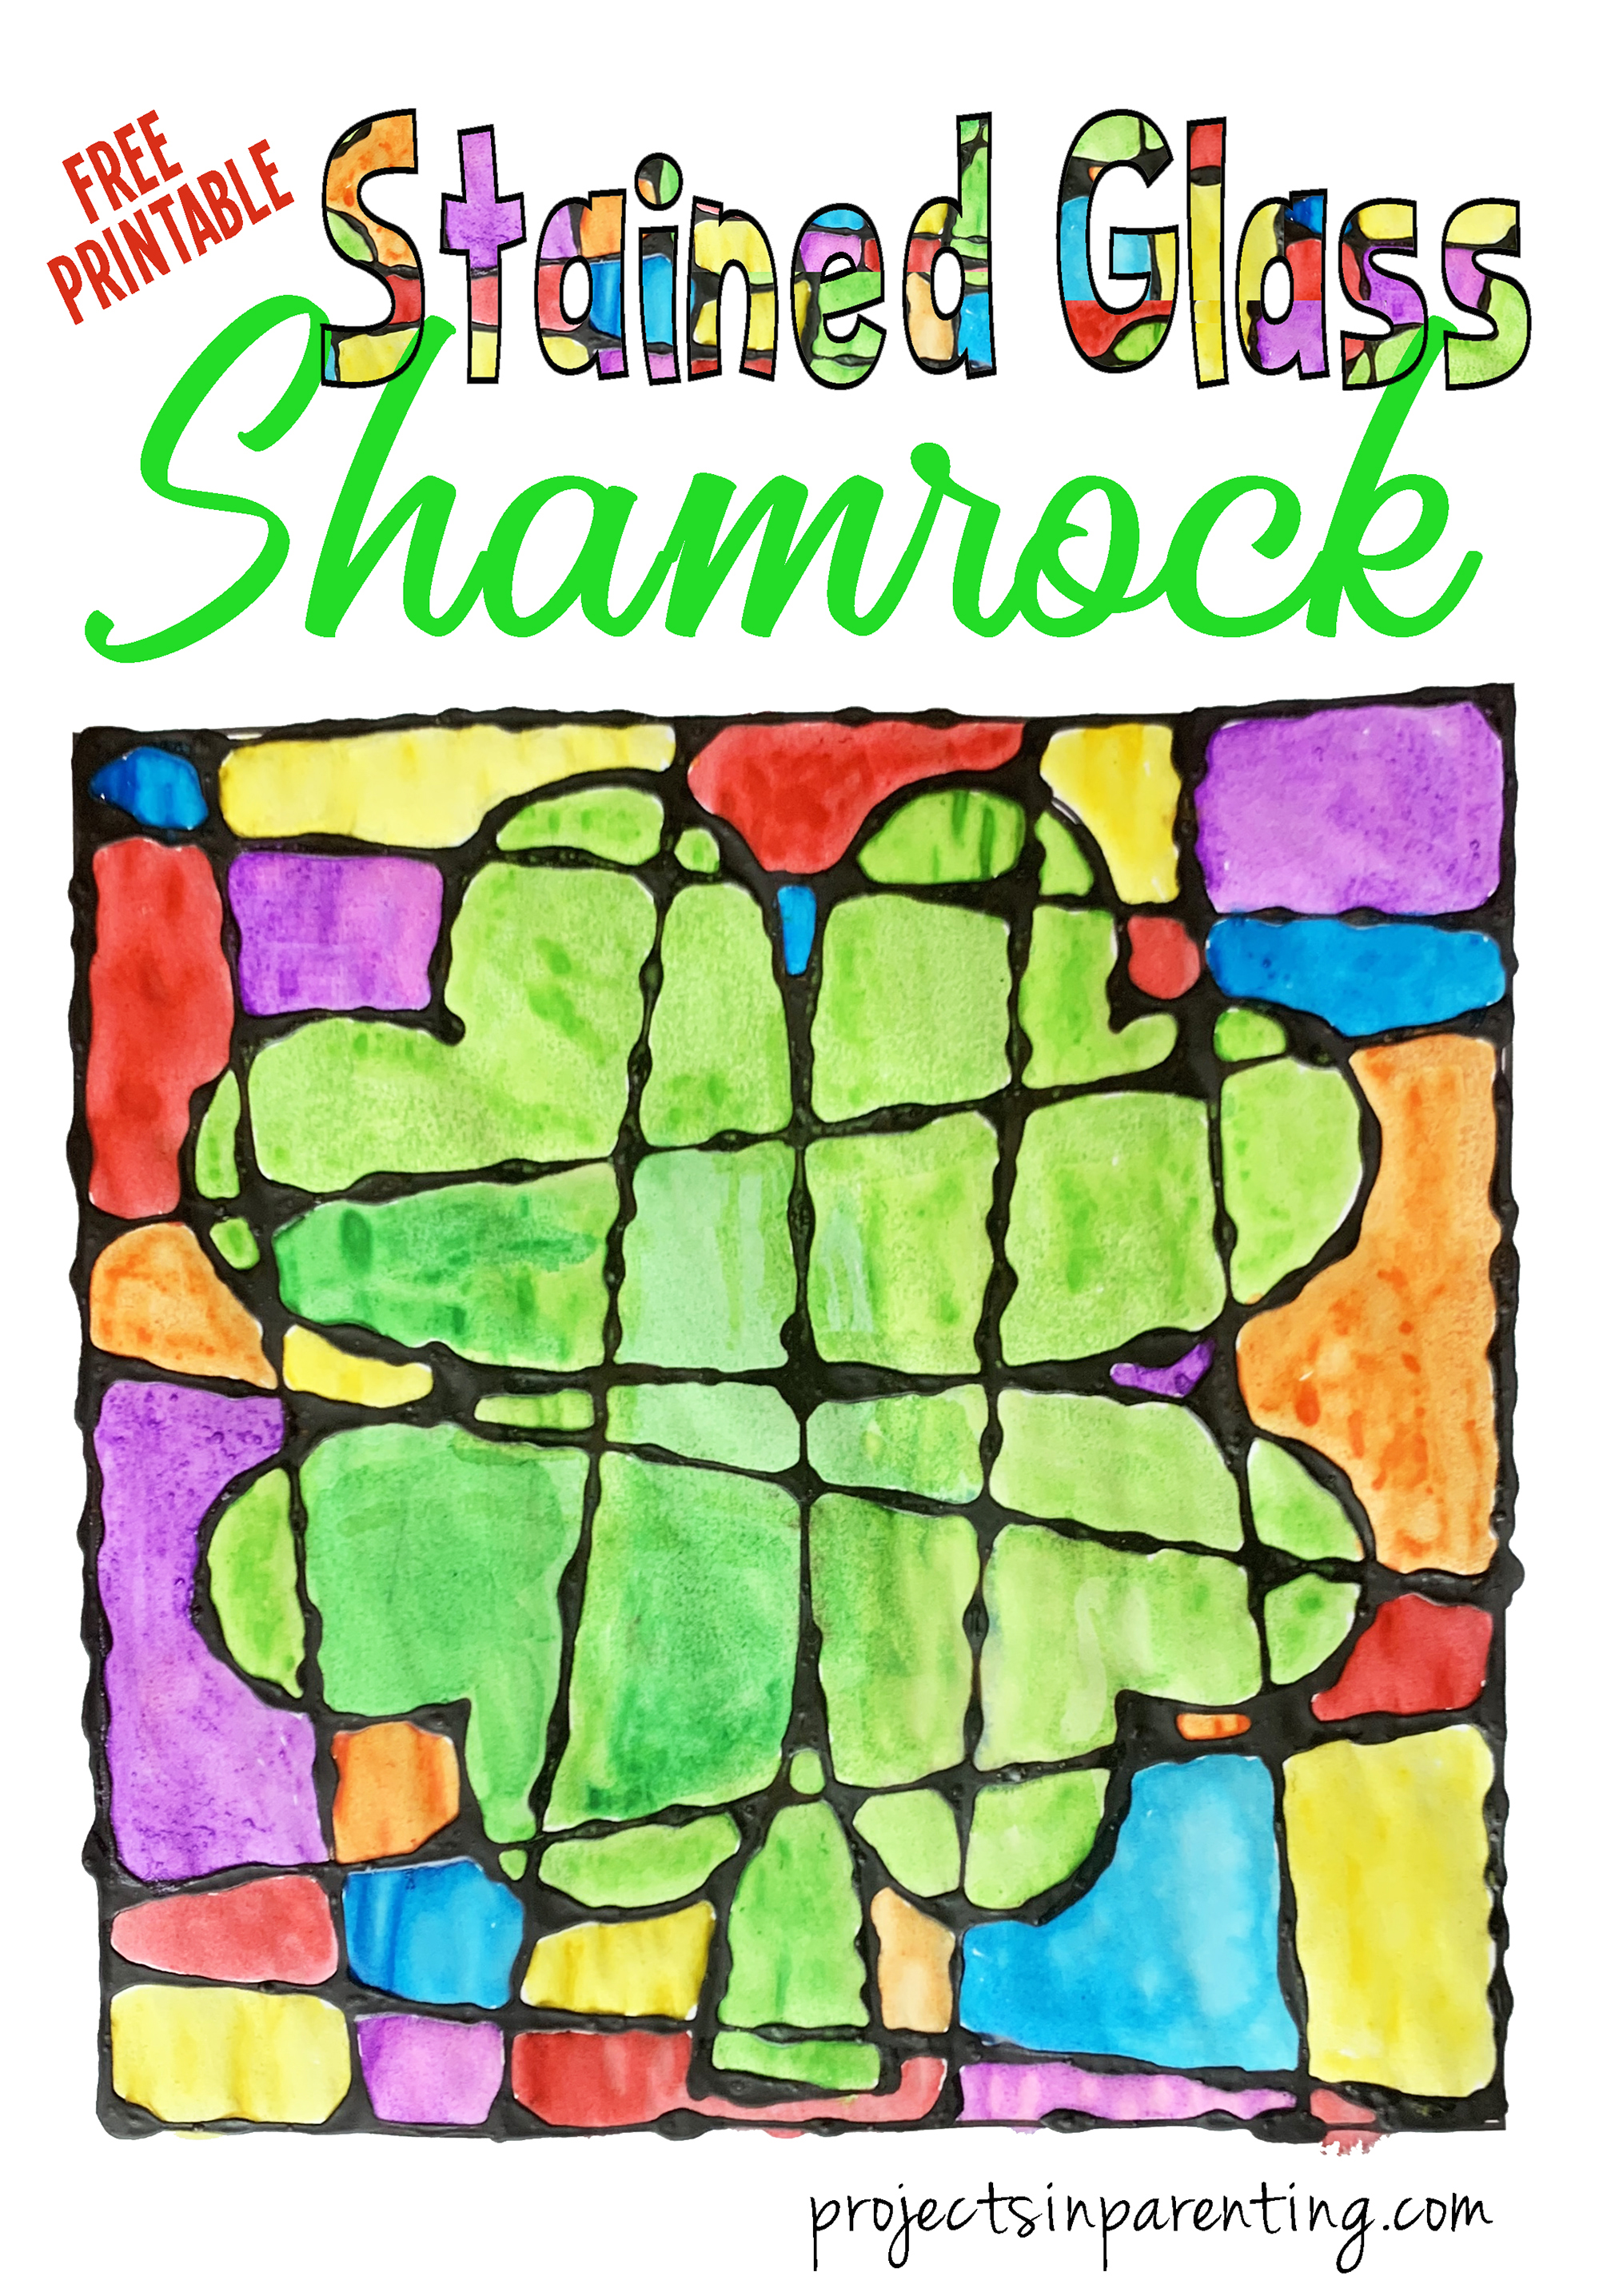 Stained glass shamrock projects in parenting